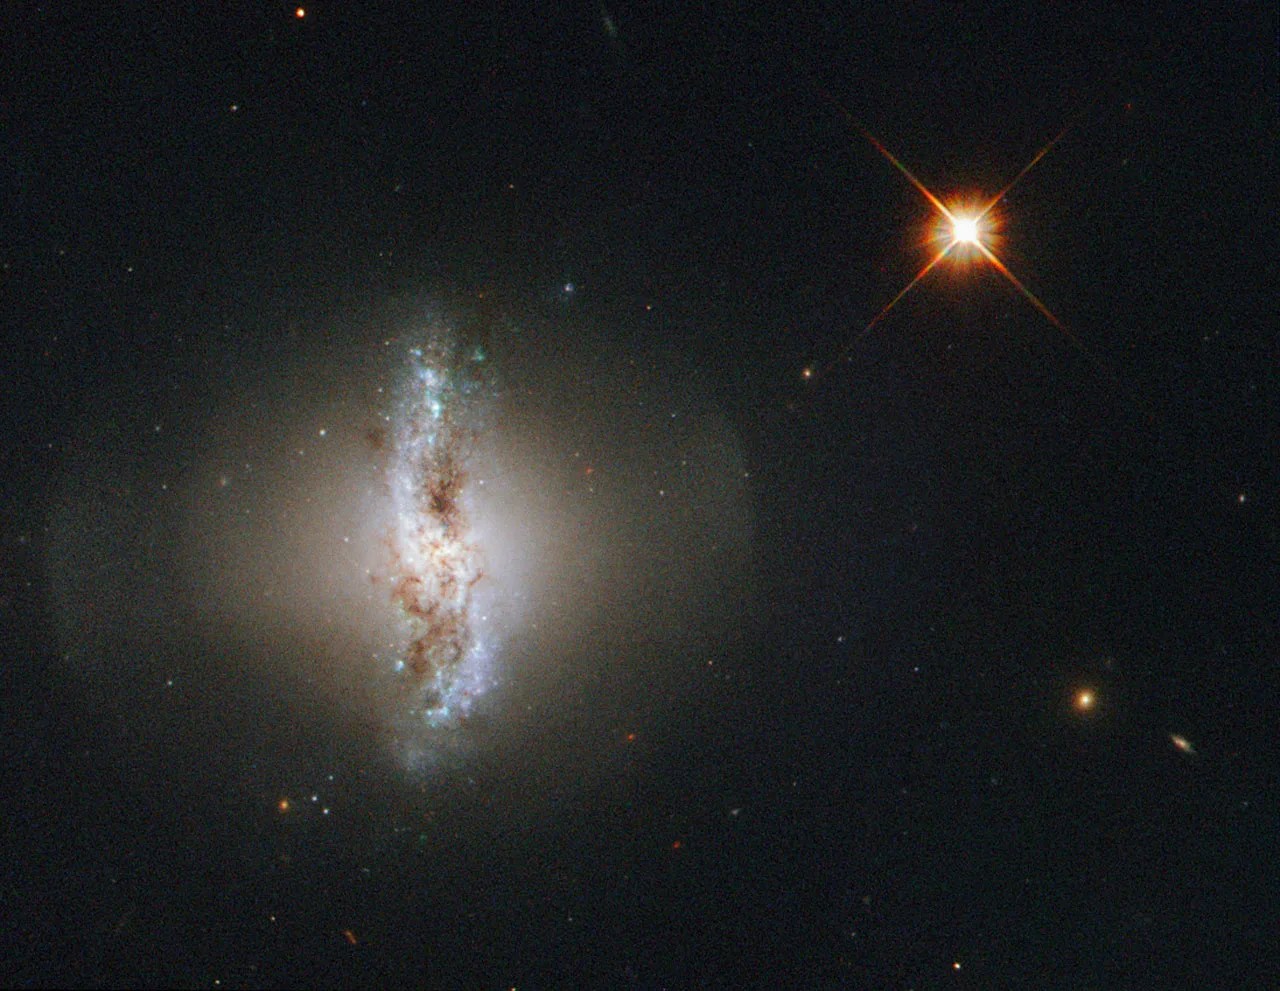 Galaxy with a bright star to the right